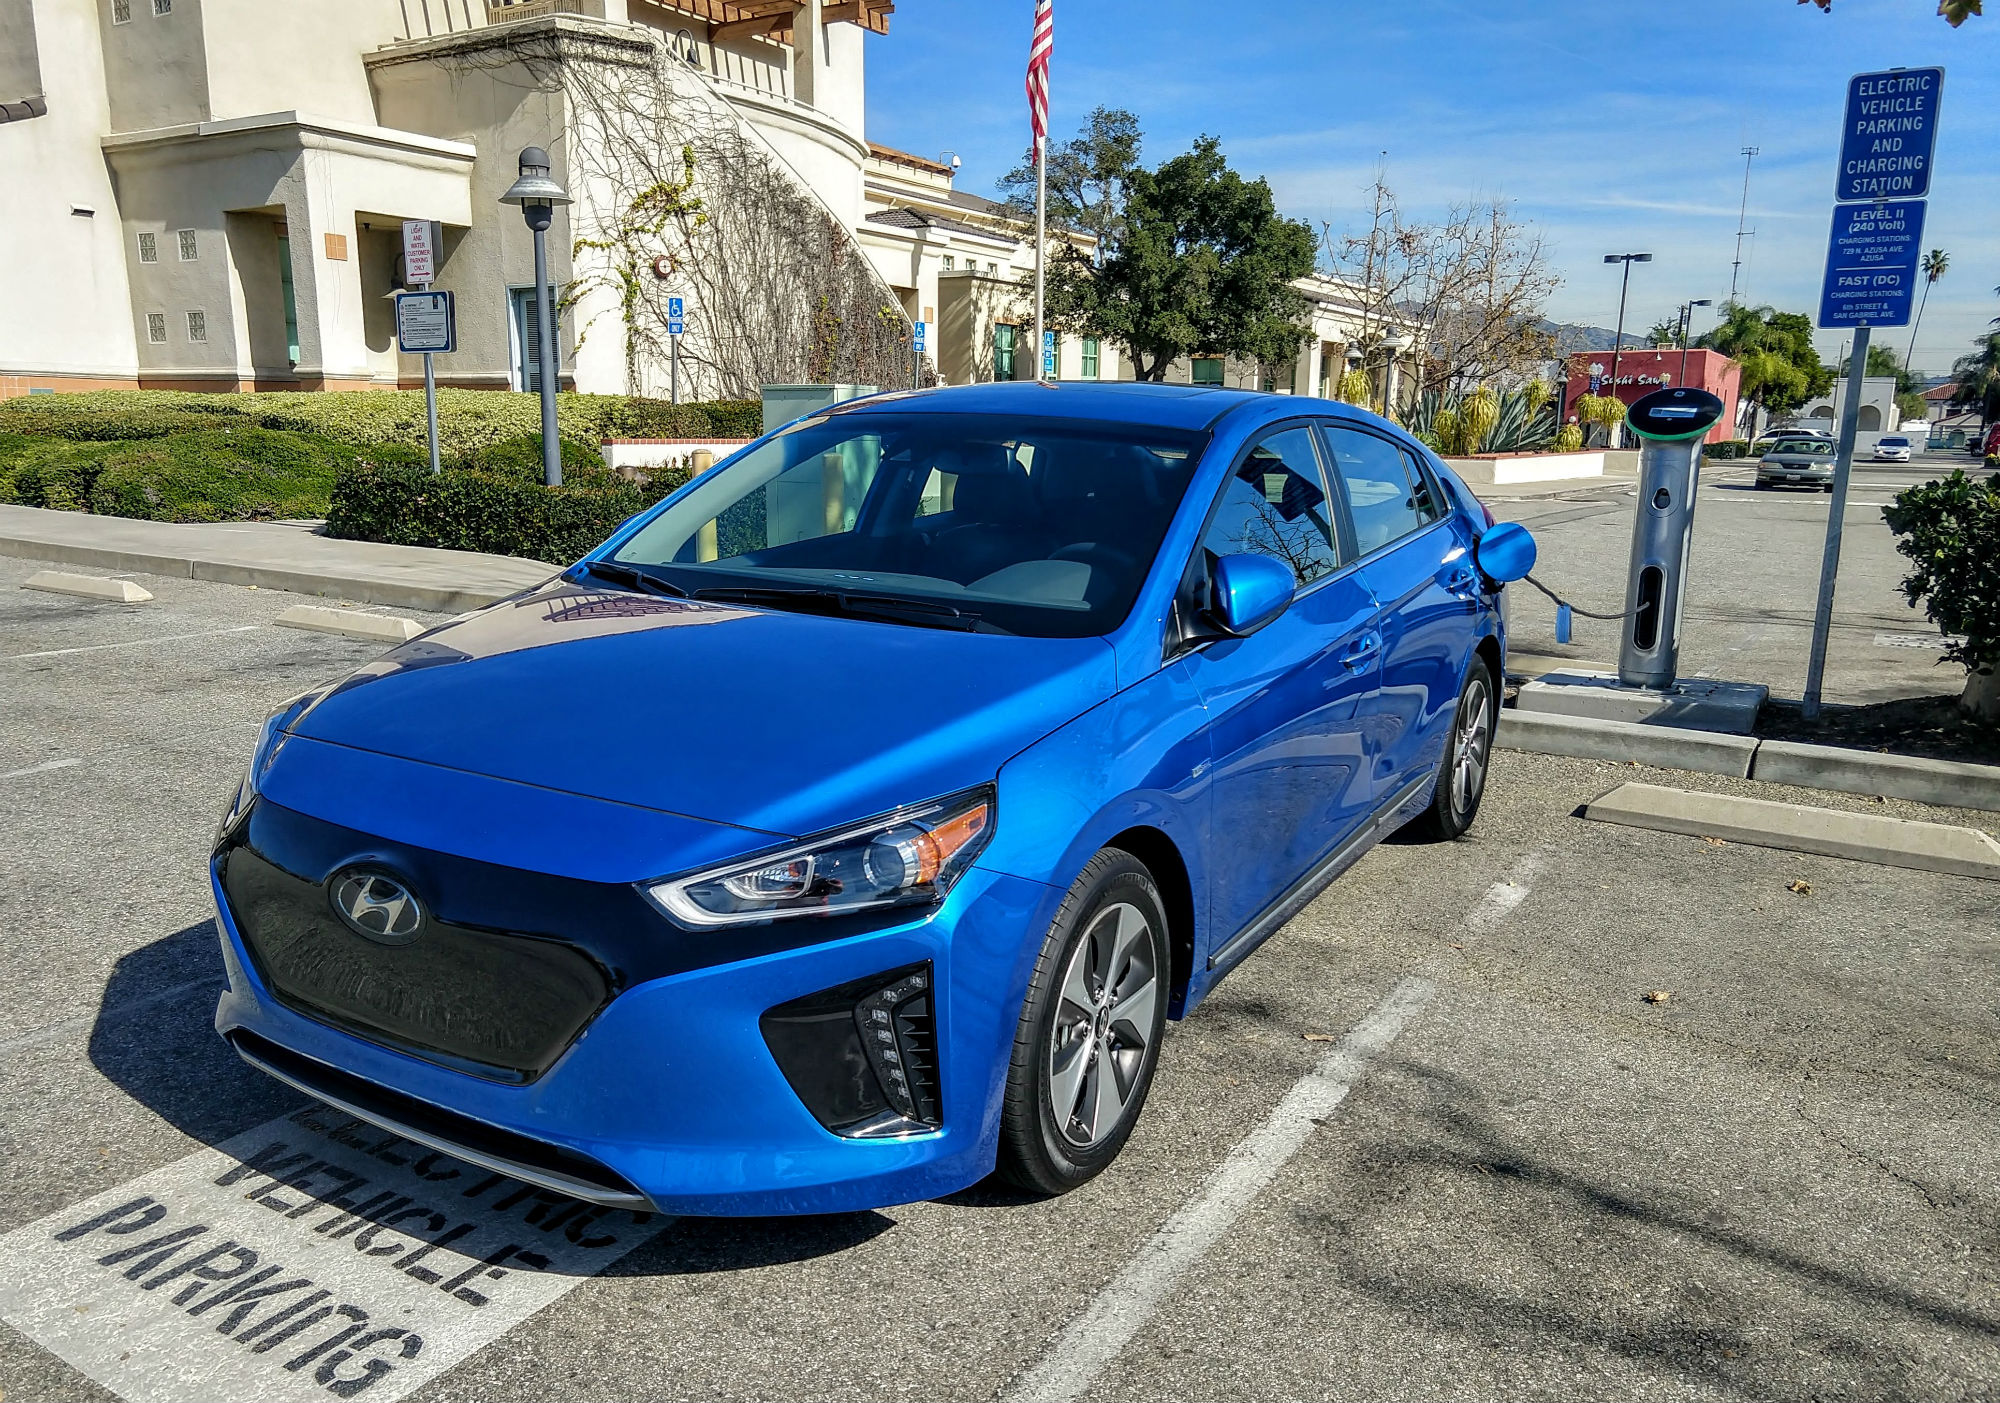 2017 Hyundai Ioniq Electric Review: Going the Distance